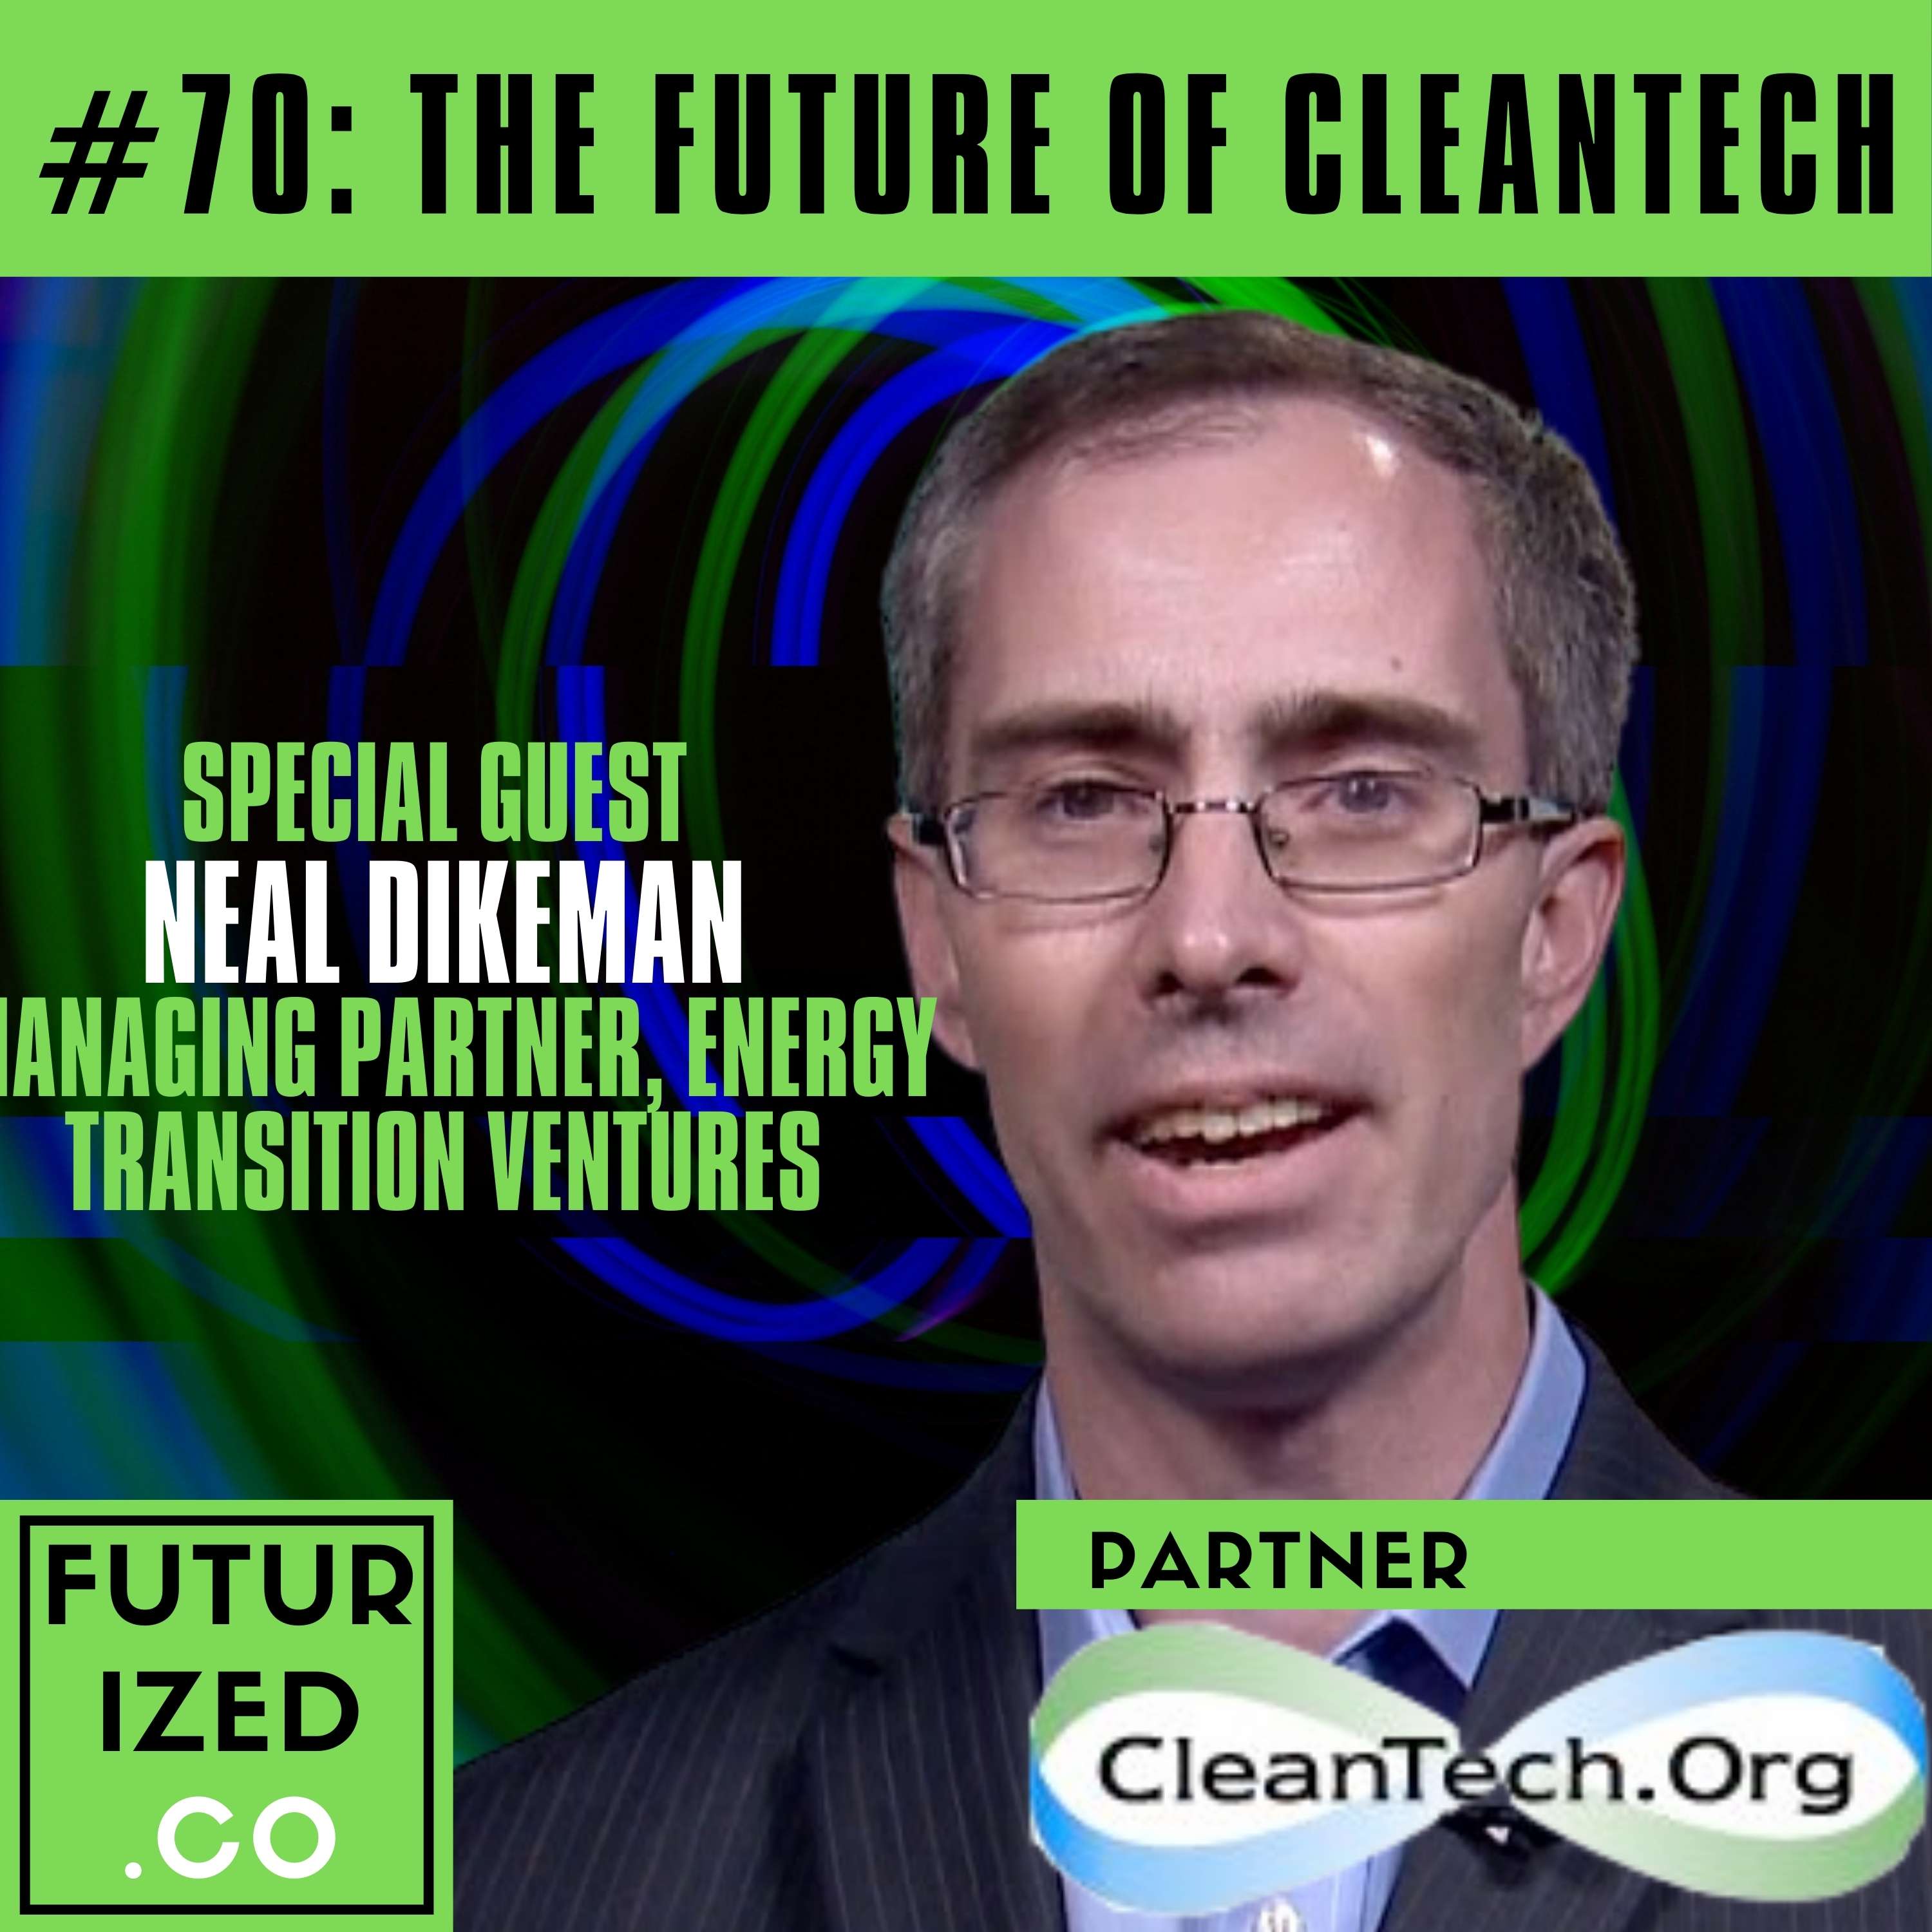 The Future of Cleantech Image